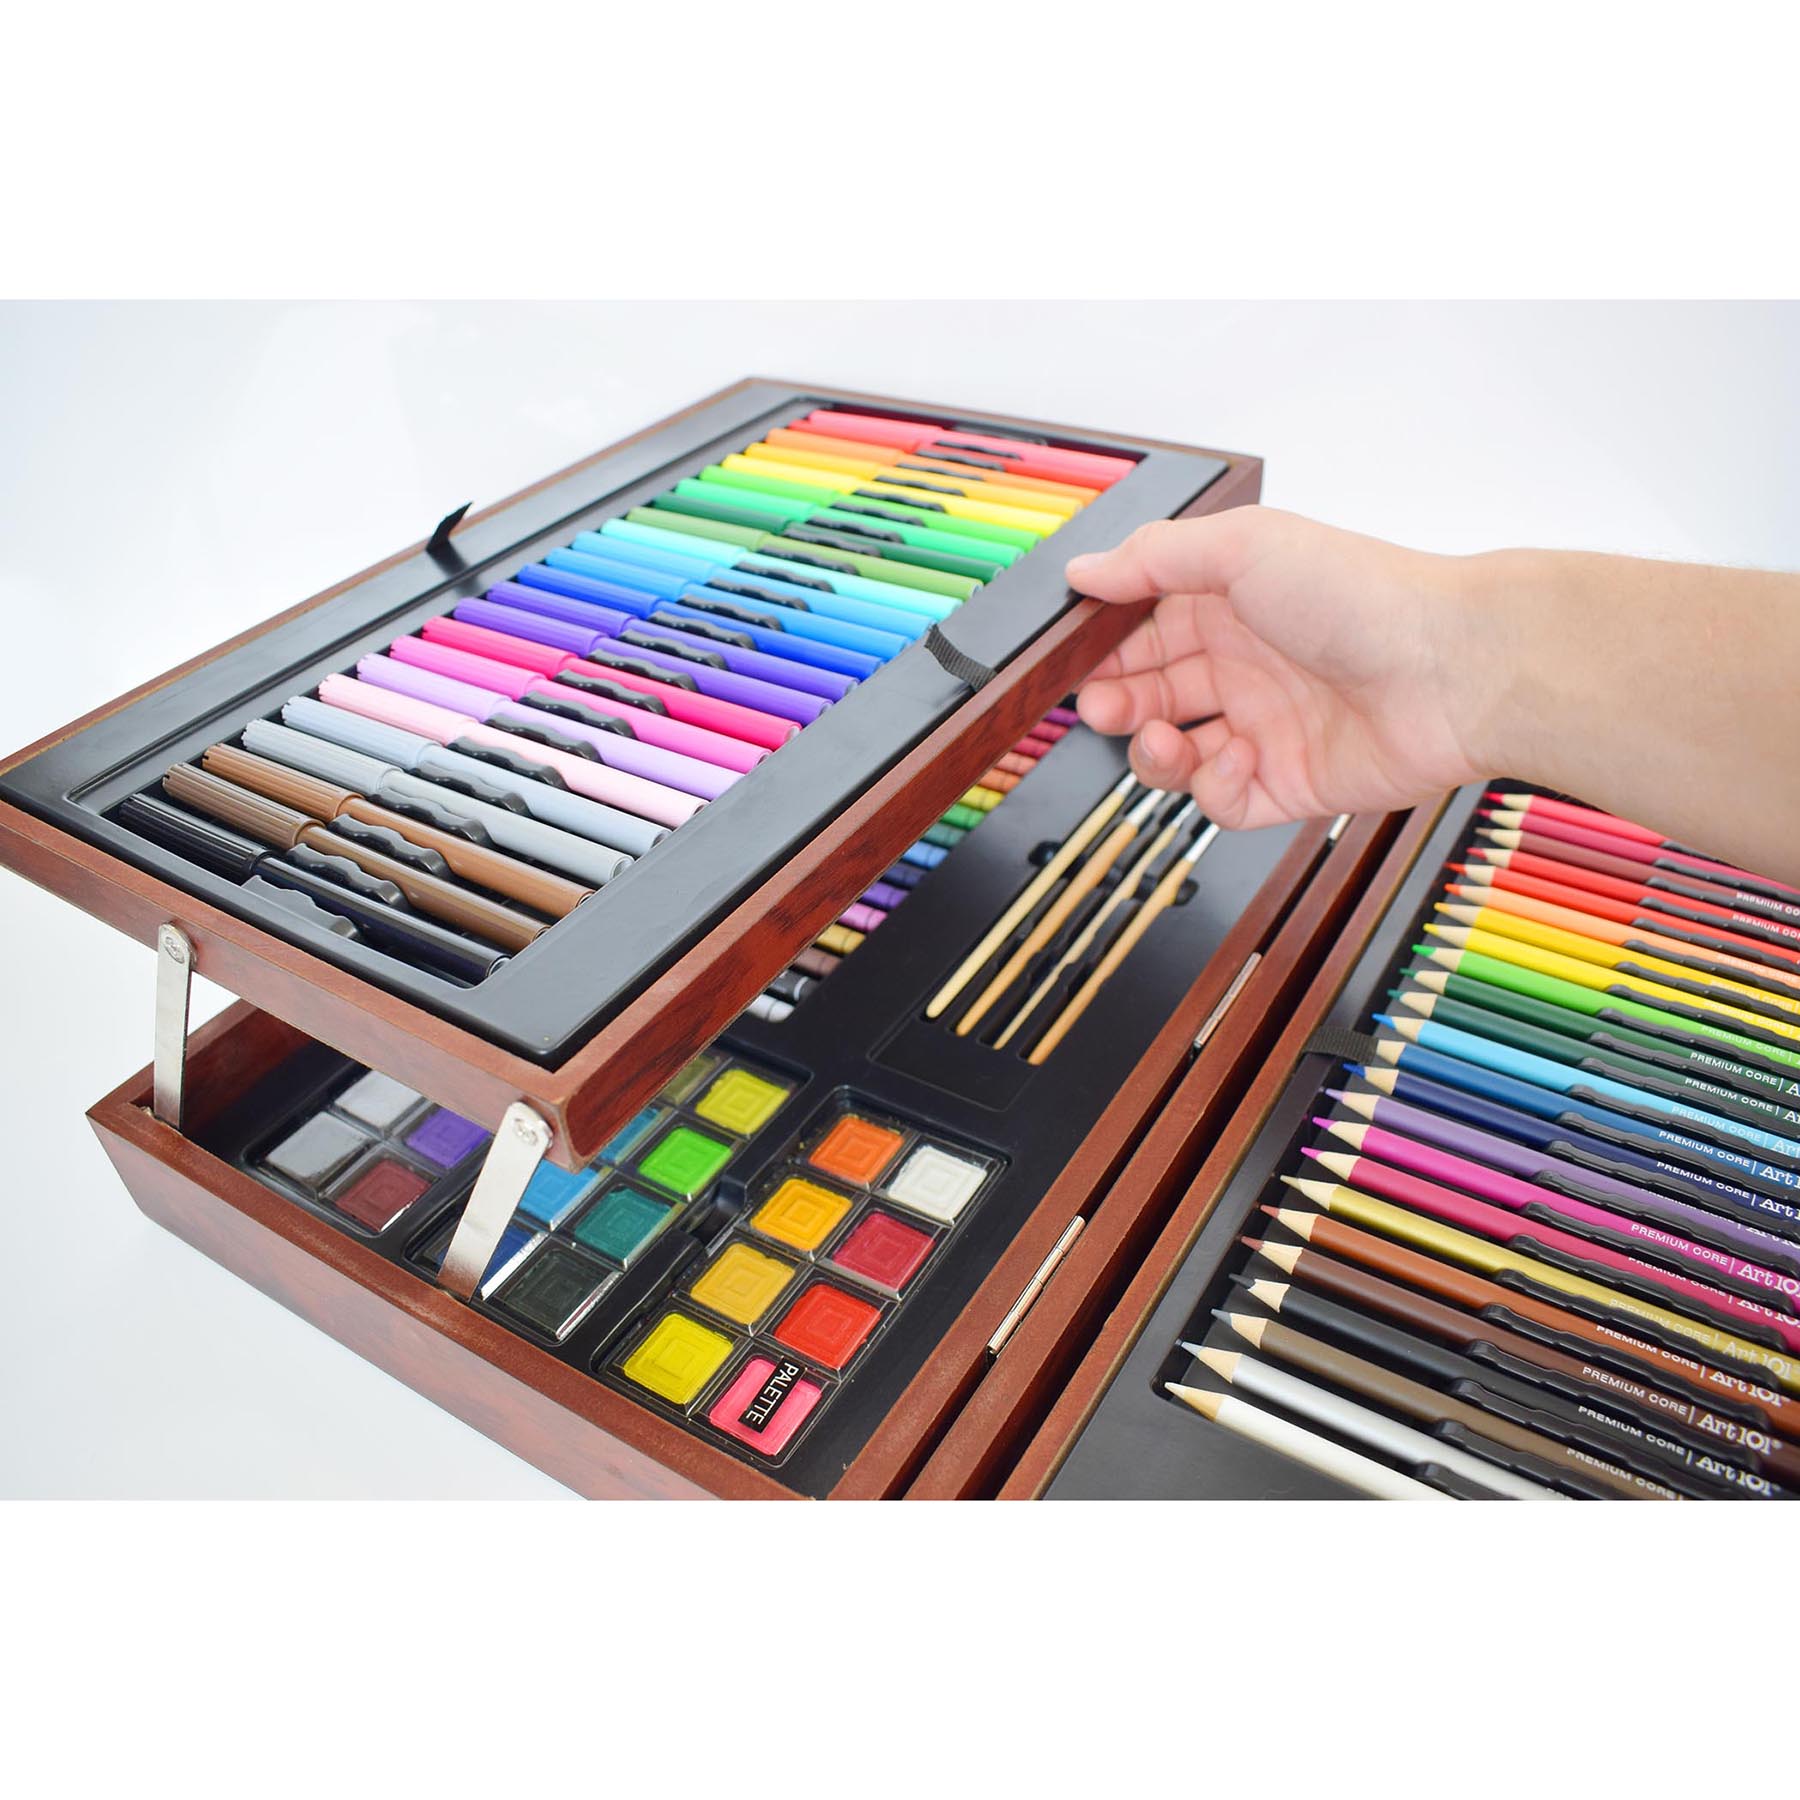 Art 101 Deluxe Wood Art Set, 170 Pieces image number null